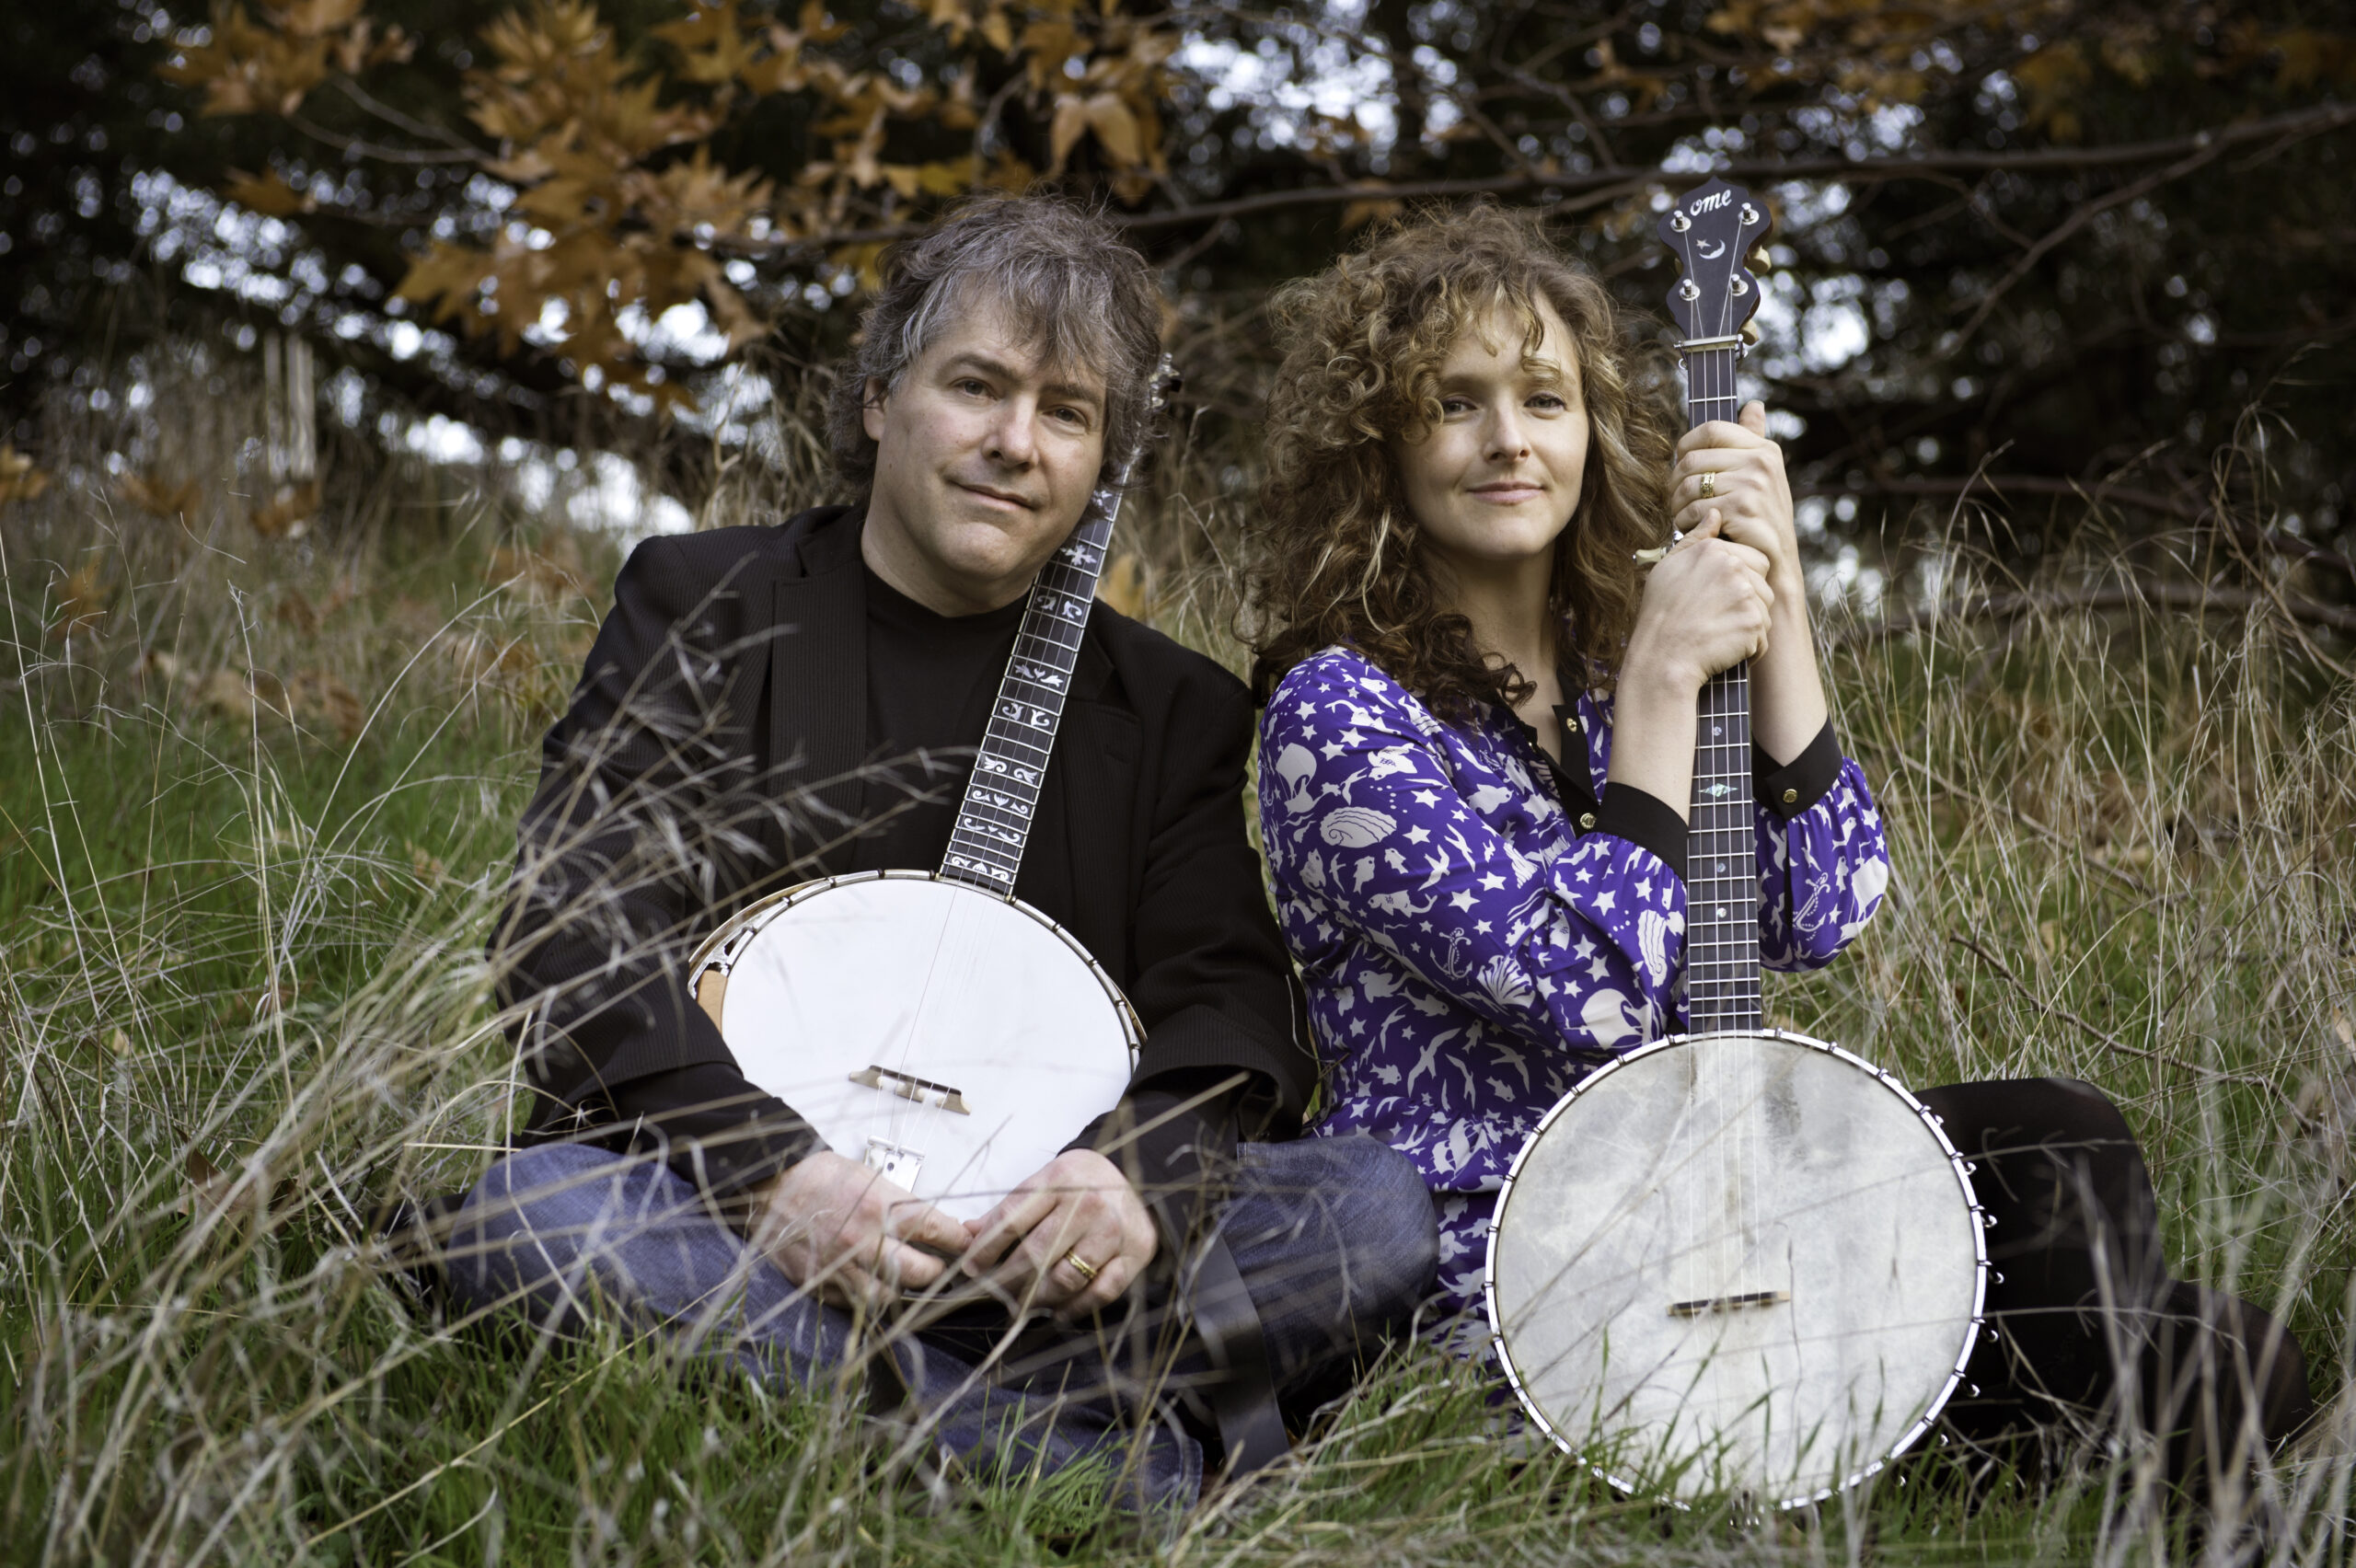 Abigail Washburn and Bela Fleck holding banjos while they sit together in a field.